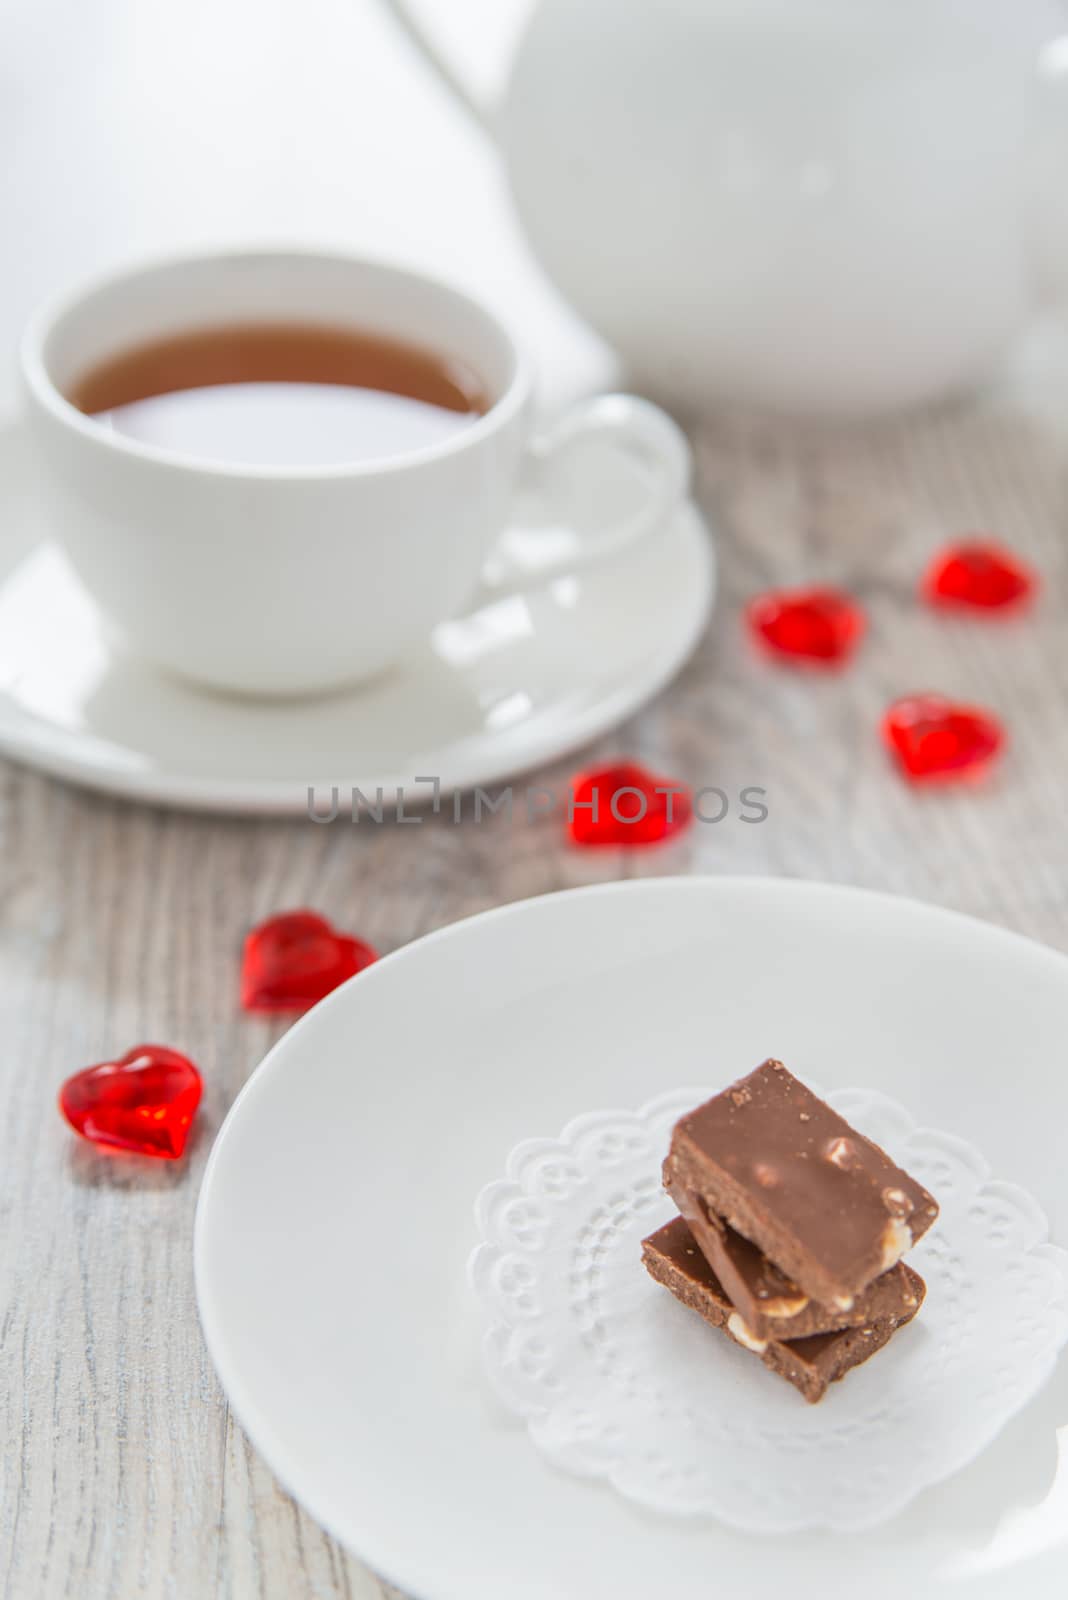 Chocolate and tea on St. Valentine day